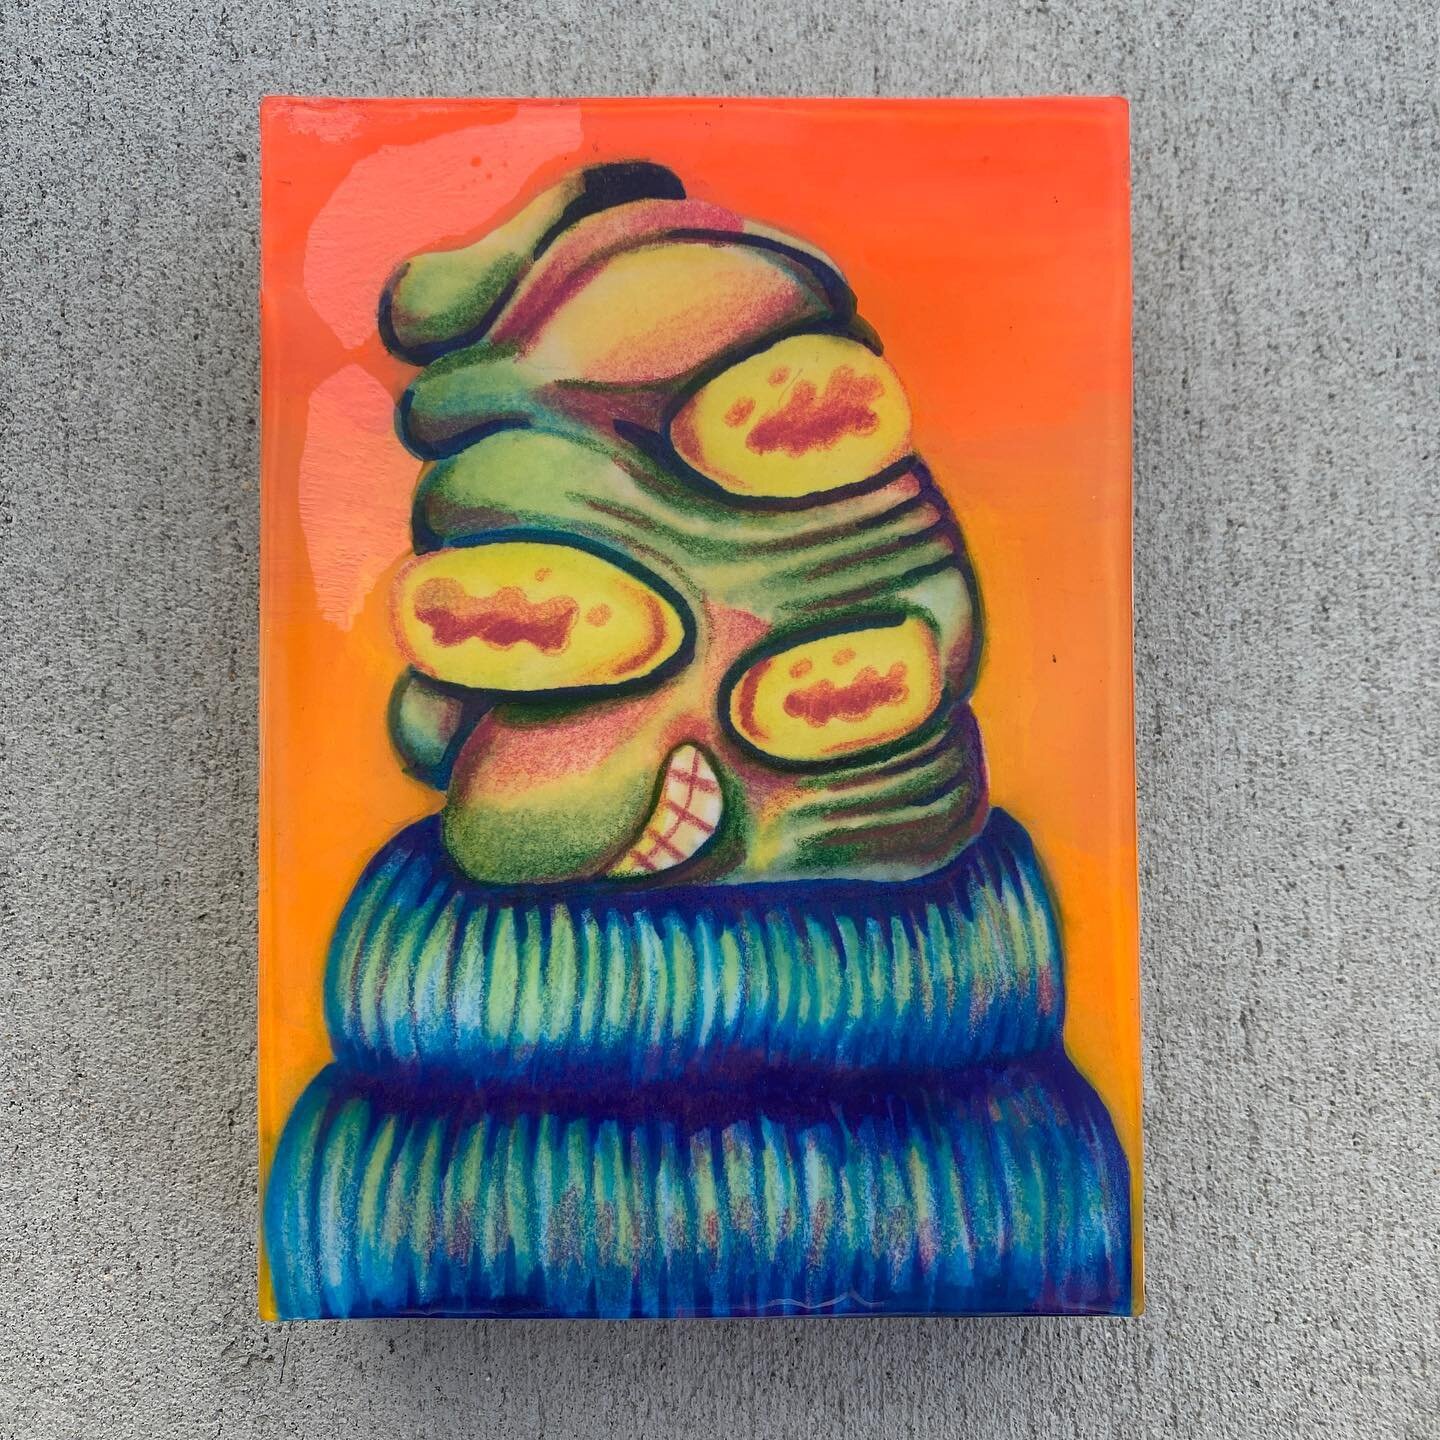 5x7
Marker, colored pencil, resin coated
.
.
Experimenting with coating drawings with resin, this little monster is the first attempt 
.
.
.
.
.
#drawing #smalldrawing #drawings #art #artworks #contemporaryart #illustration #chicagoart #chicagoartist